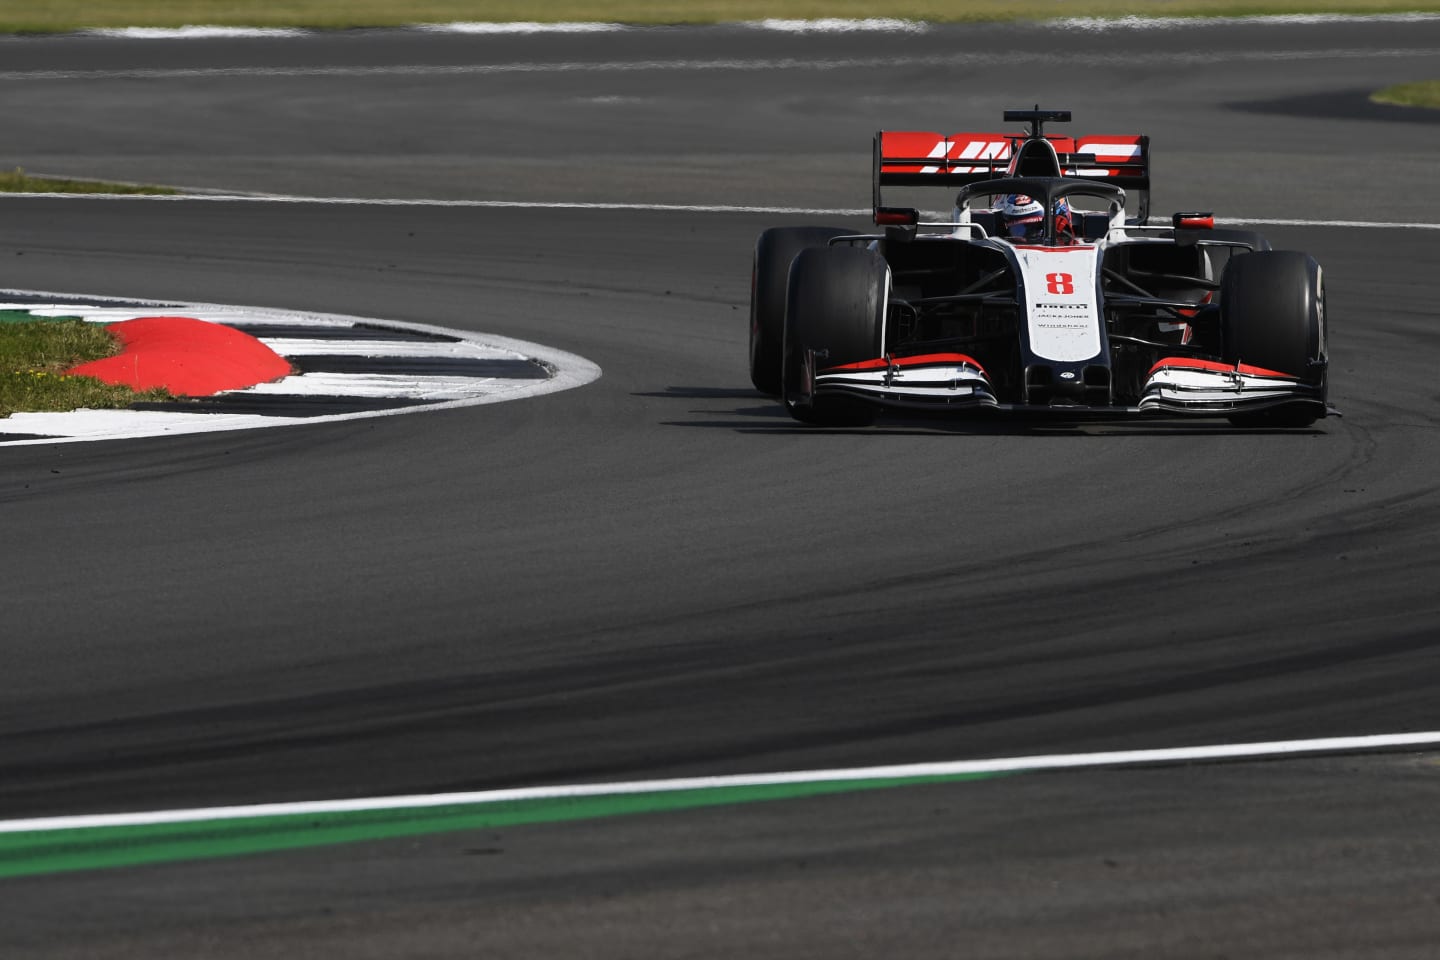 NORTHAMPTON, ENGLAND - AUGUST 09: Romain Grosjean of France driving the (8) Haas F1 Team VF-20 Ferrari on track during the F1 70th Anniversary Grand Prix at Silverstone on August 09, 2020 in Northampton, England. (Photo by Rudy Carezzevoli/Getty Images)